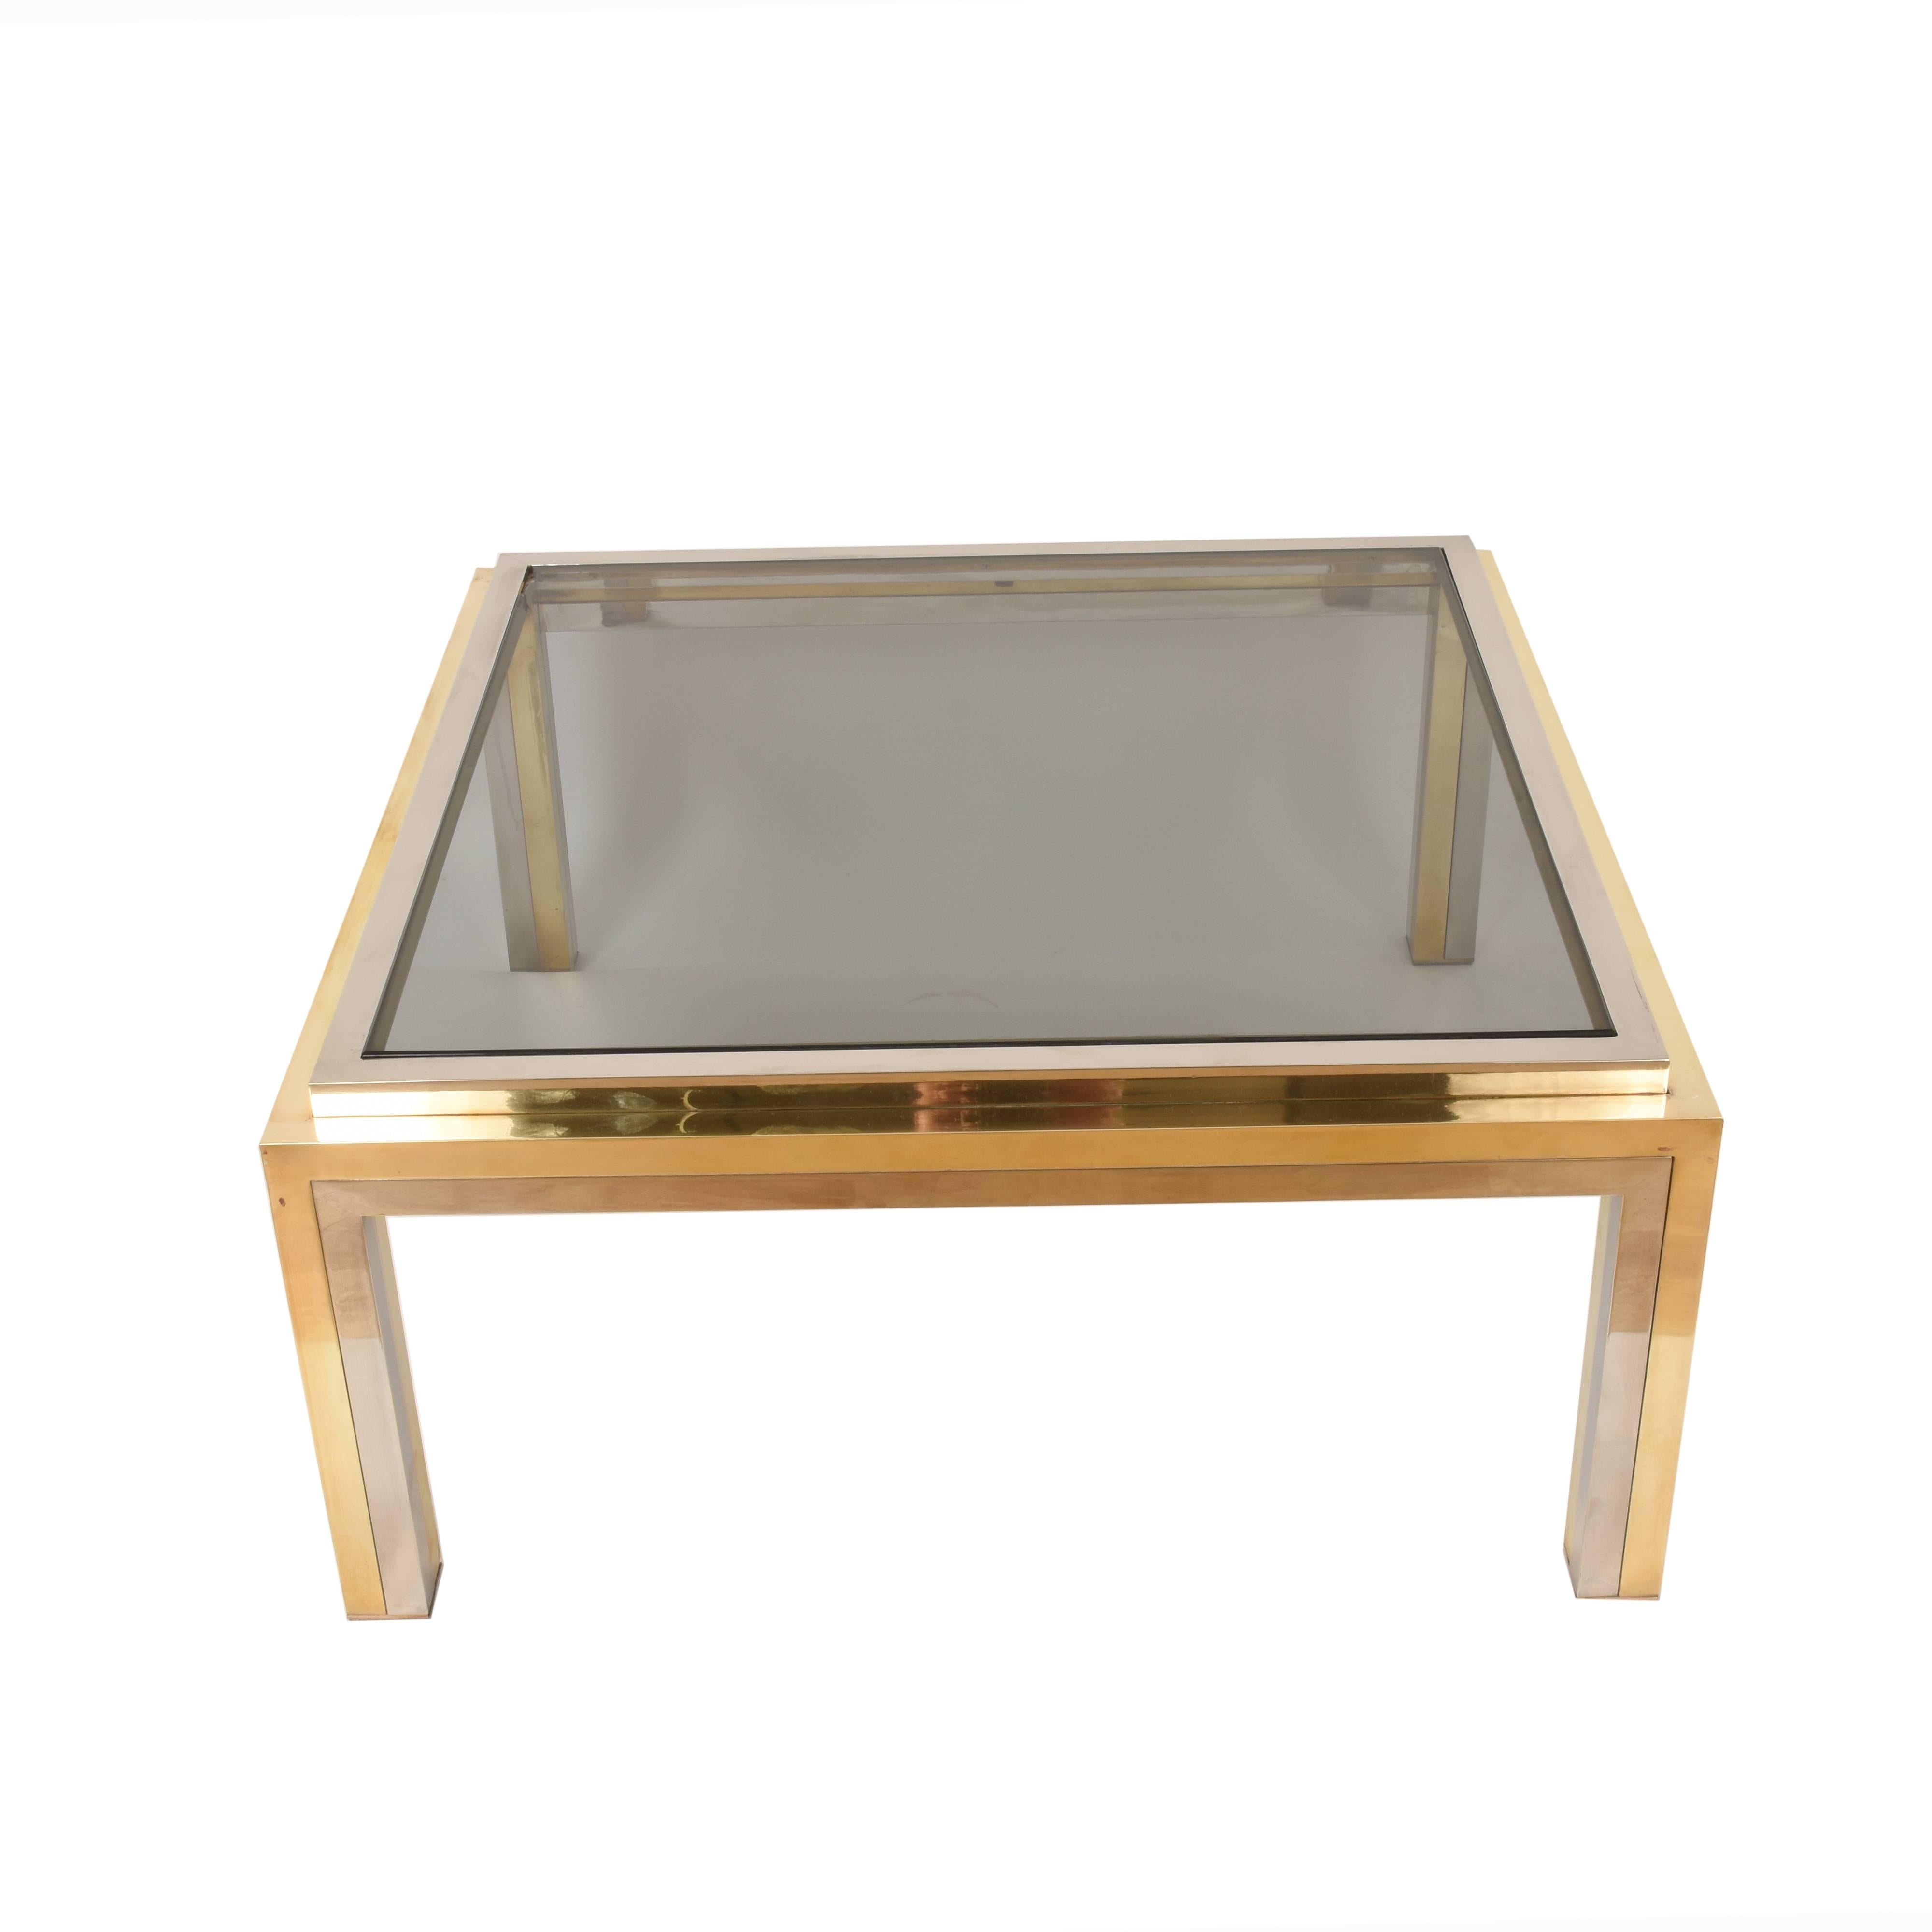 Elegant midcentury smoked glass, brass and chrome squared coffee table. This amazing piece was designed by Romeo Rega in Italy during the 1970s.

This coffee table, thanks to the chromed metal and brass the frame, and smoked glass in the middle is